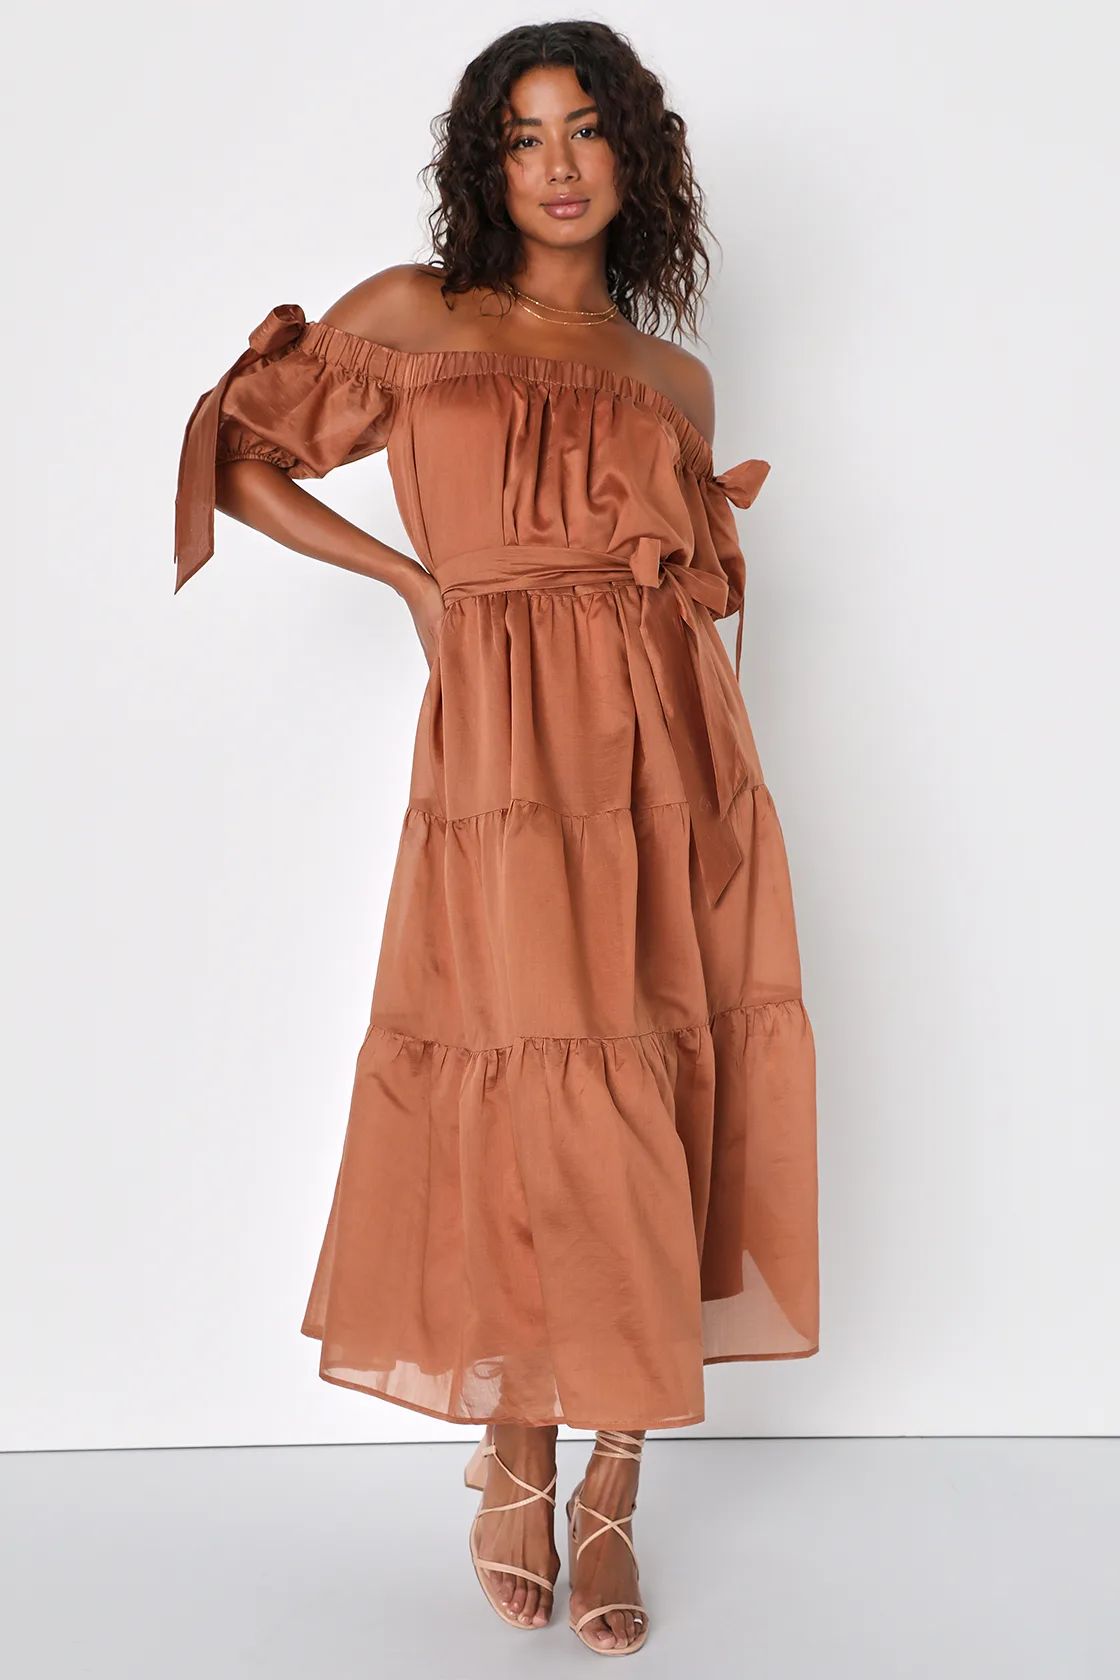 Charming Adoration Brown Tiered Off-the-Shoulder Midi Dress | Lulus (US)